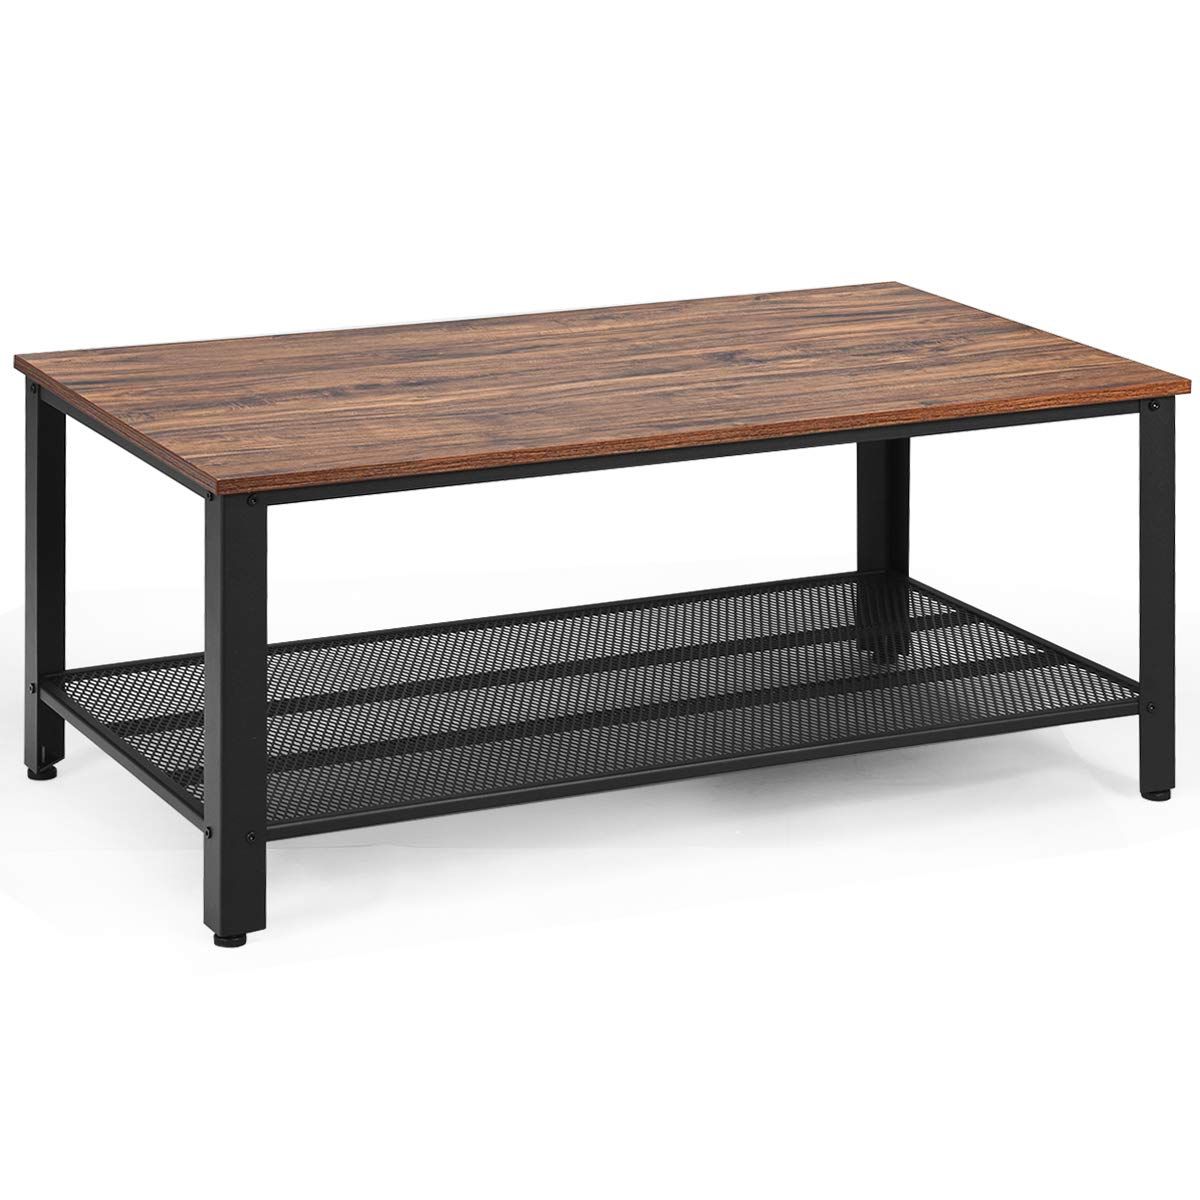 Most Current Pecan Brown Triangular Coffee Tables With Regard To Giantex Coffee Table 42 Inch W/storage Shelf And (View 11 of 20)